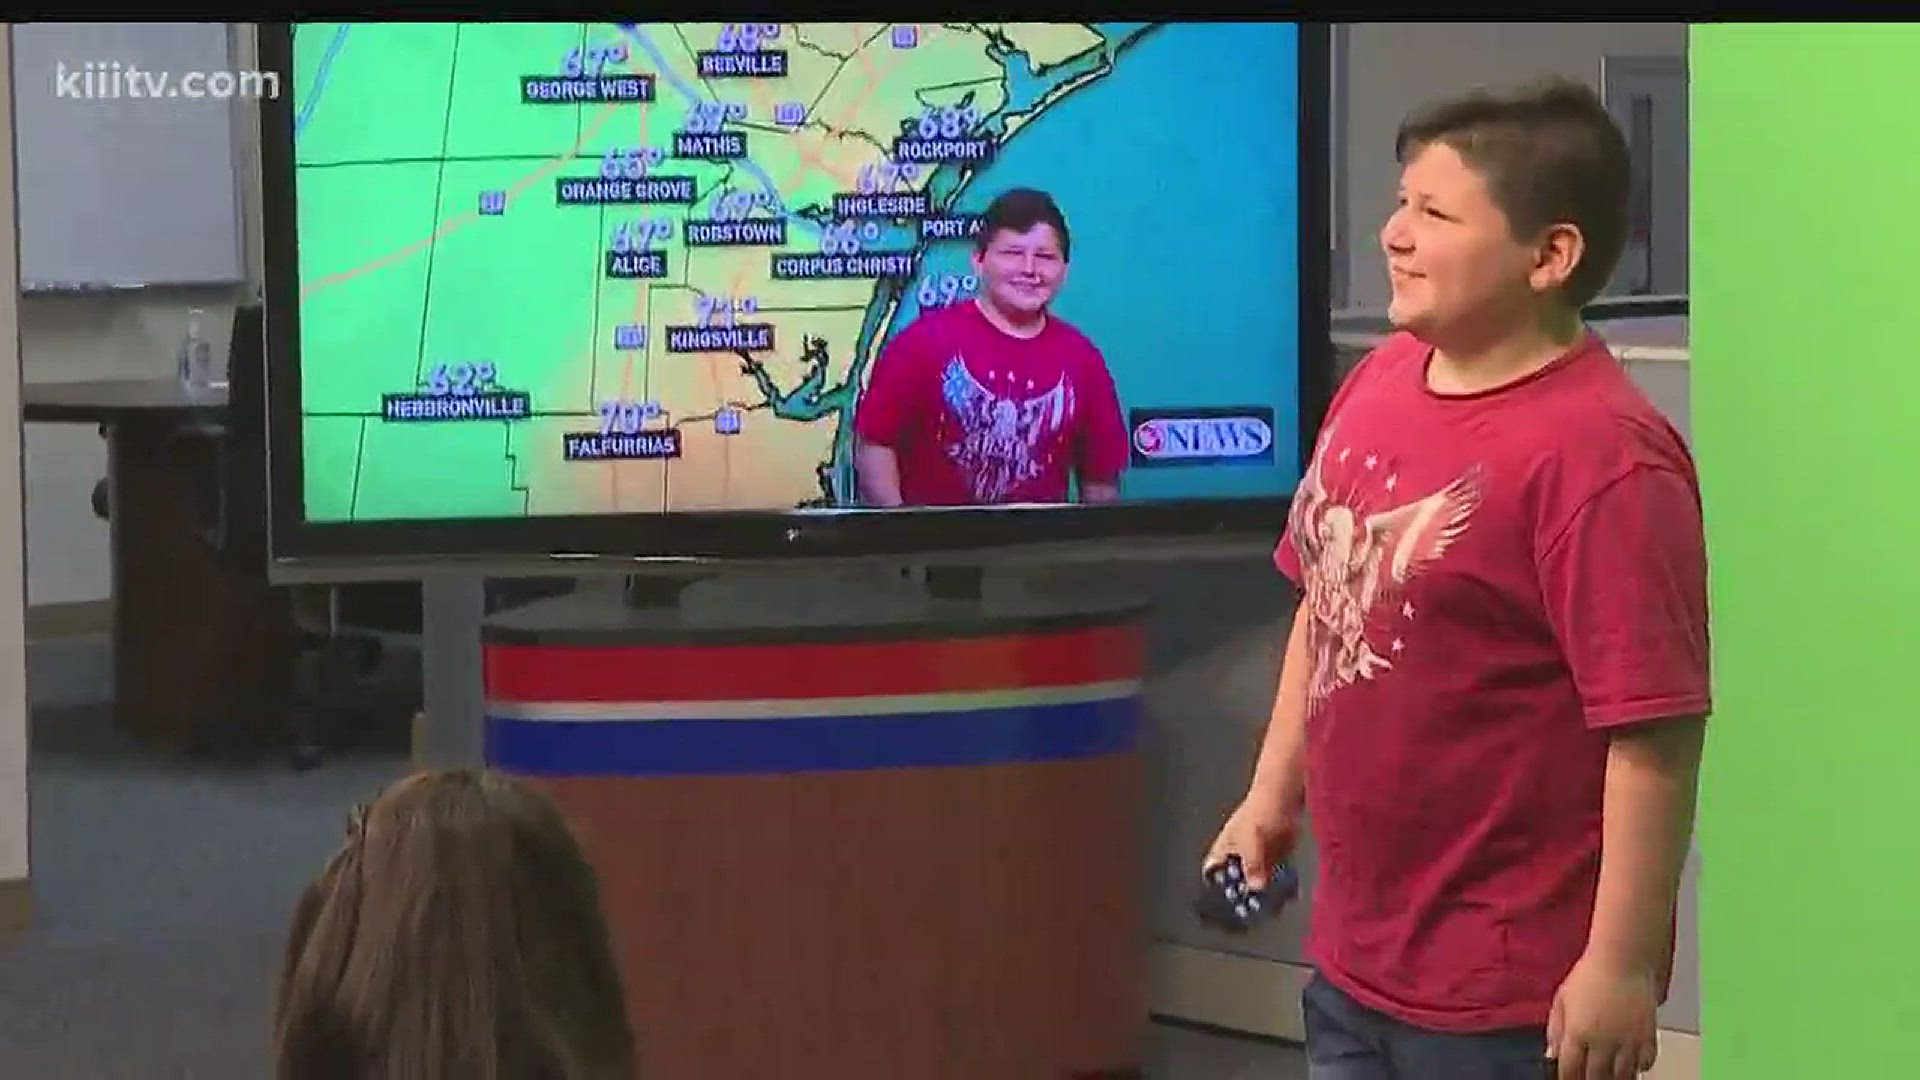 Families from the Salvation Army were at the Kiii-TV studios Friday as part of the Kids' Spring Break Week.